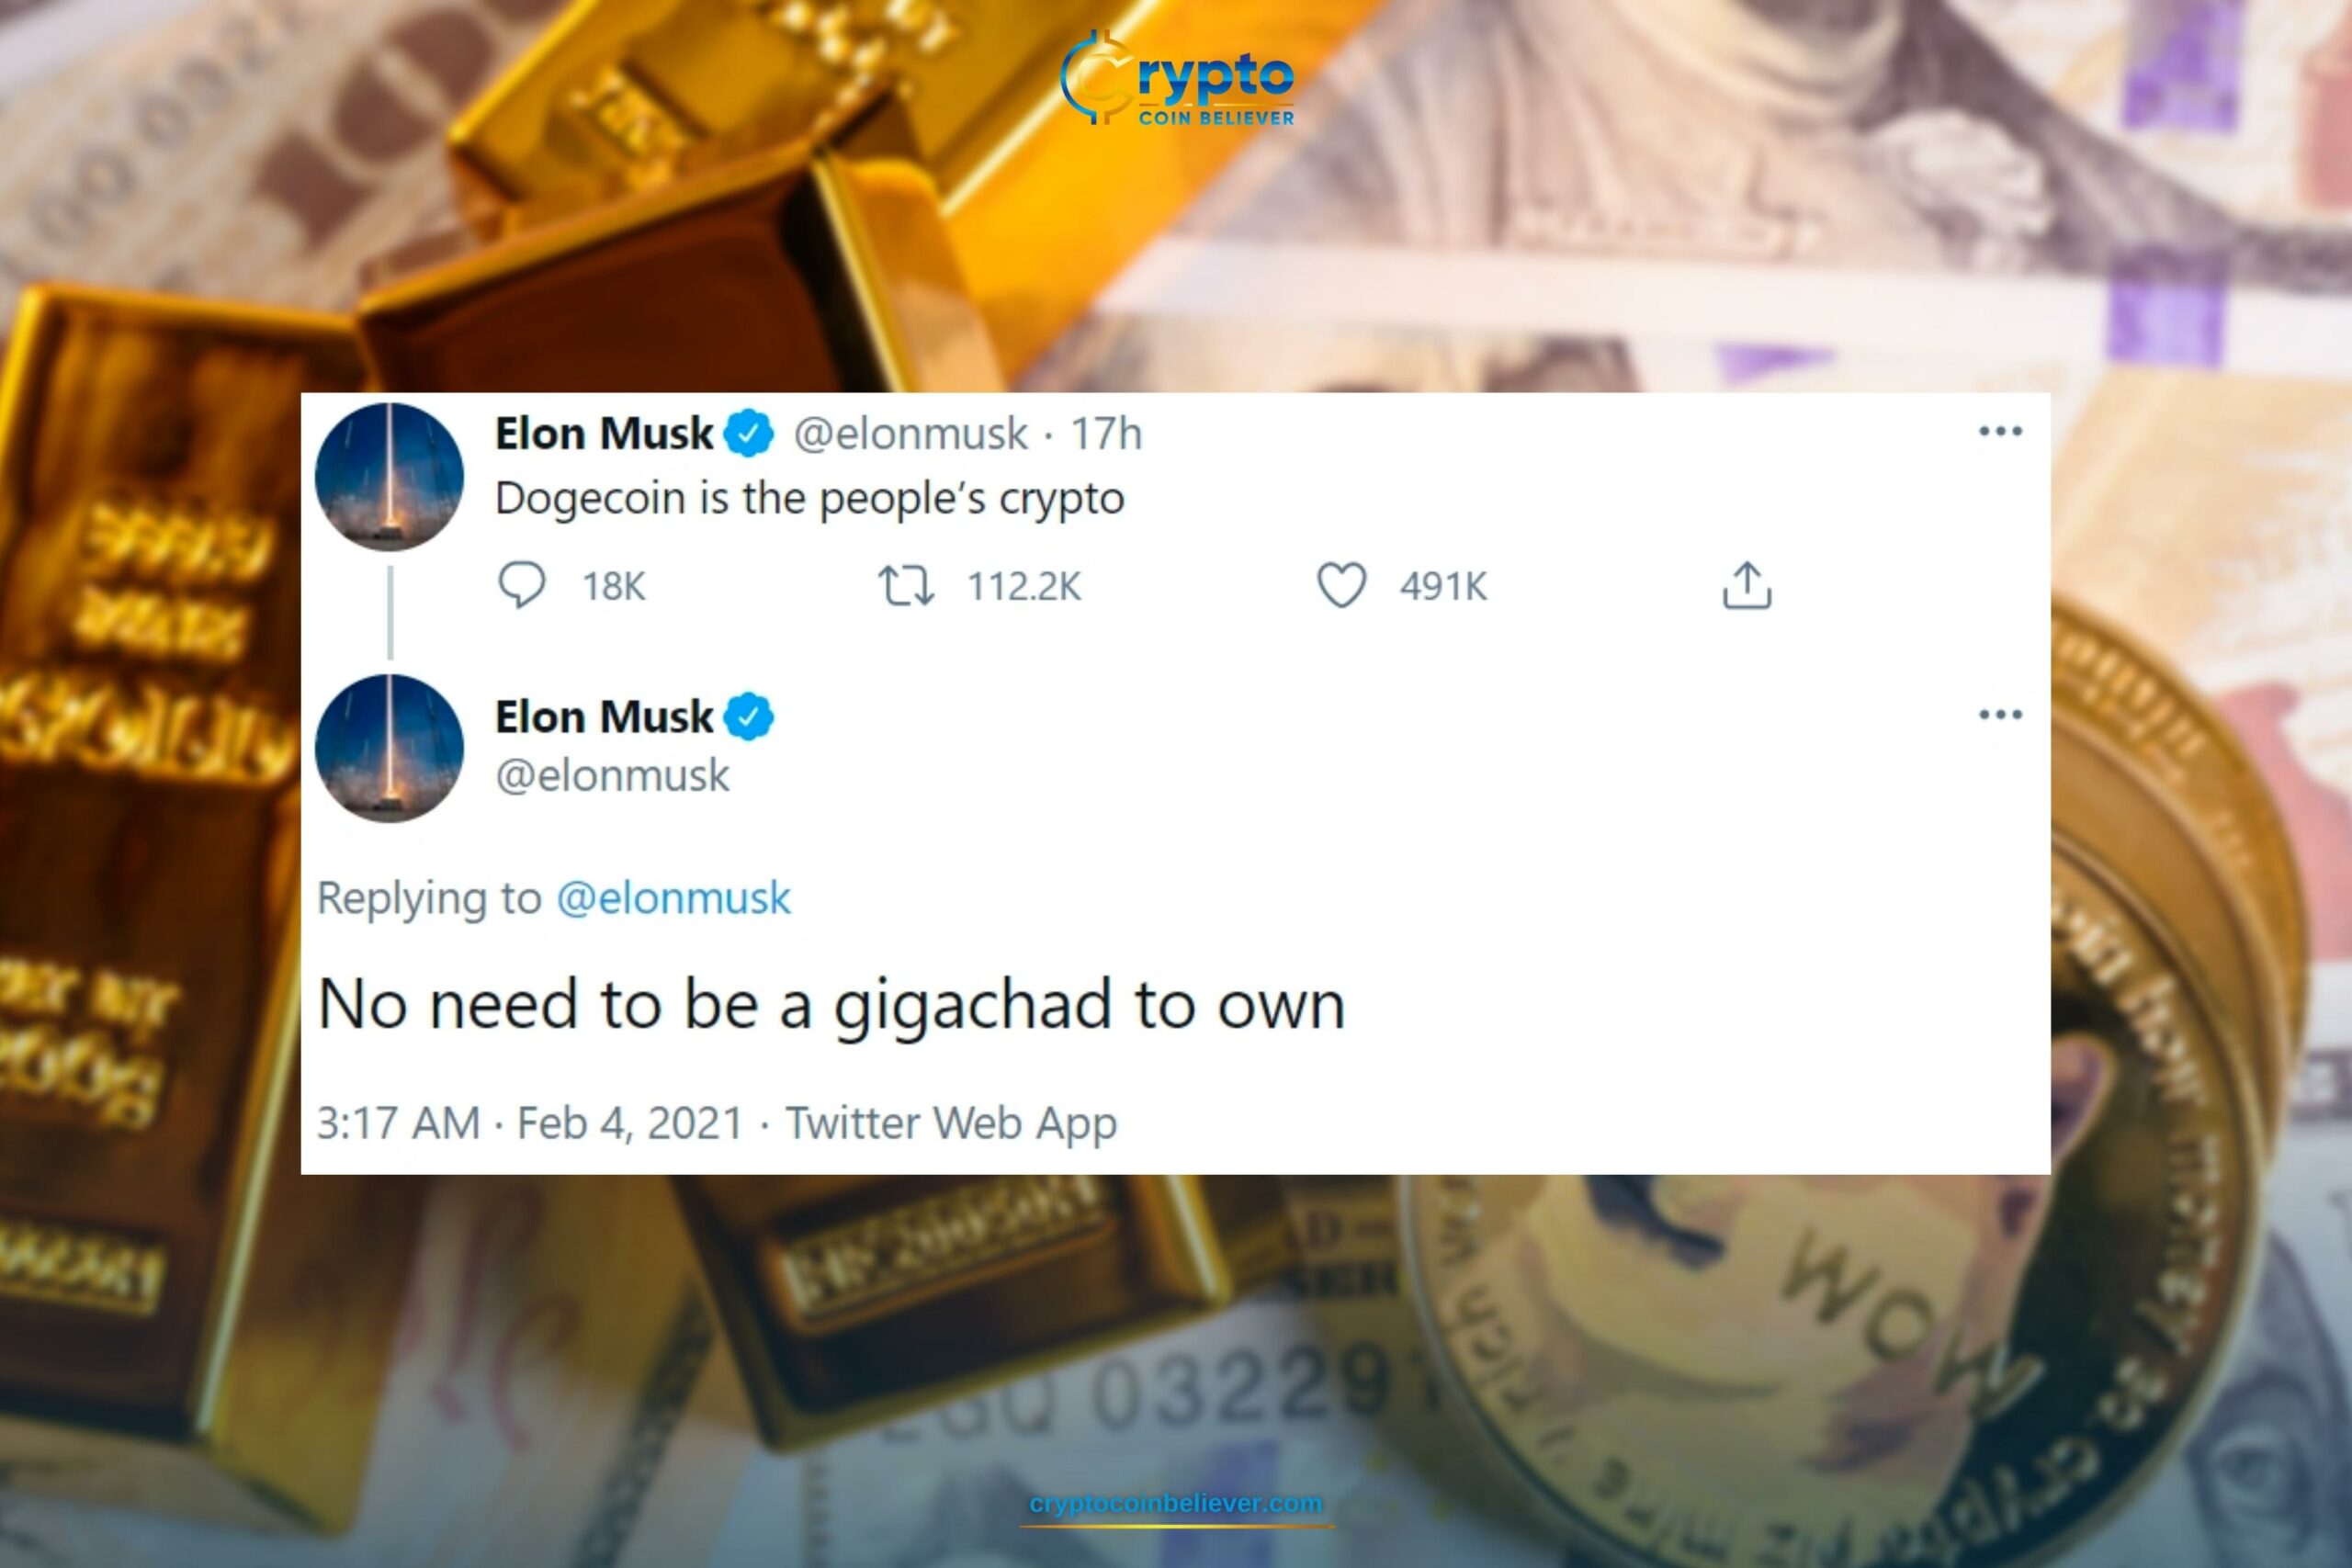 Doge coin is the people's crypto - Elon Musk tweet